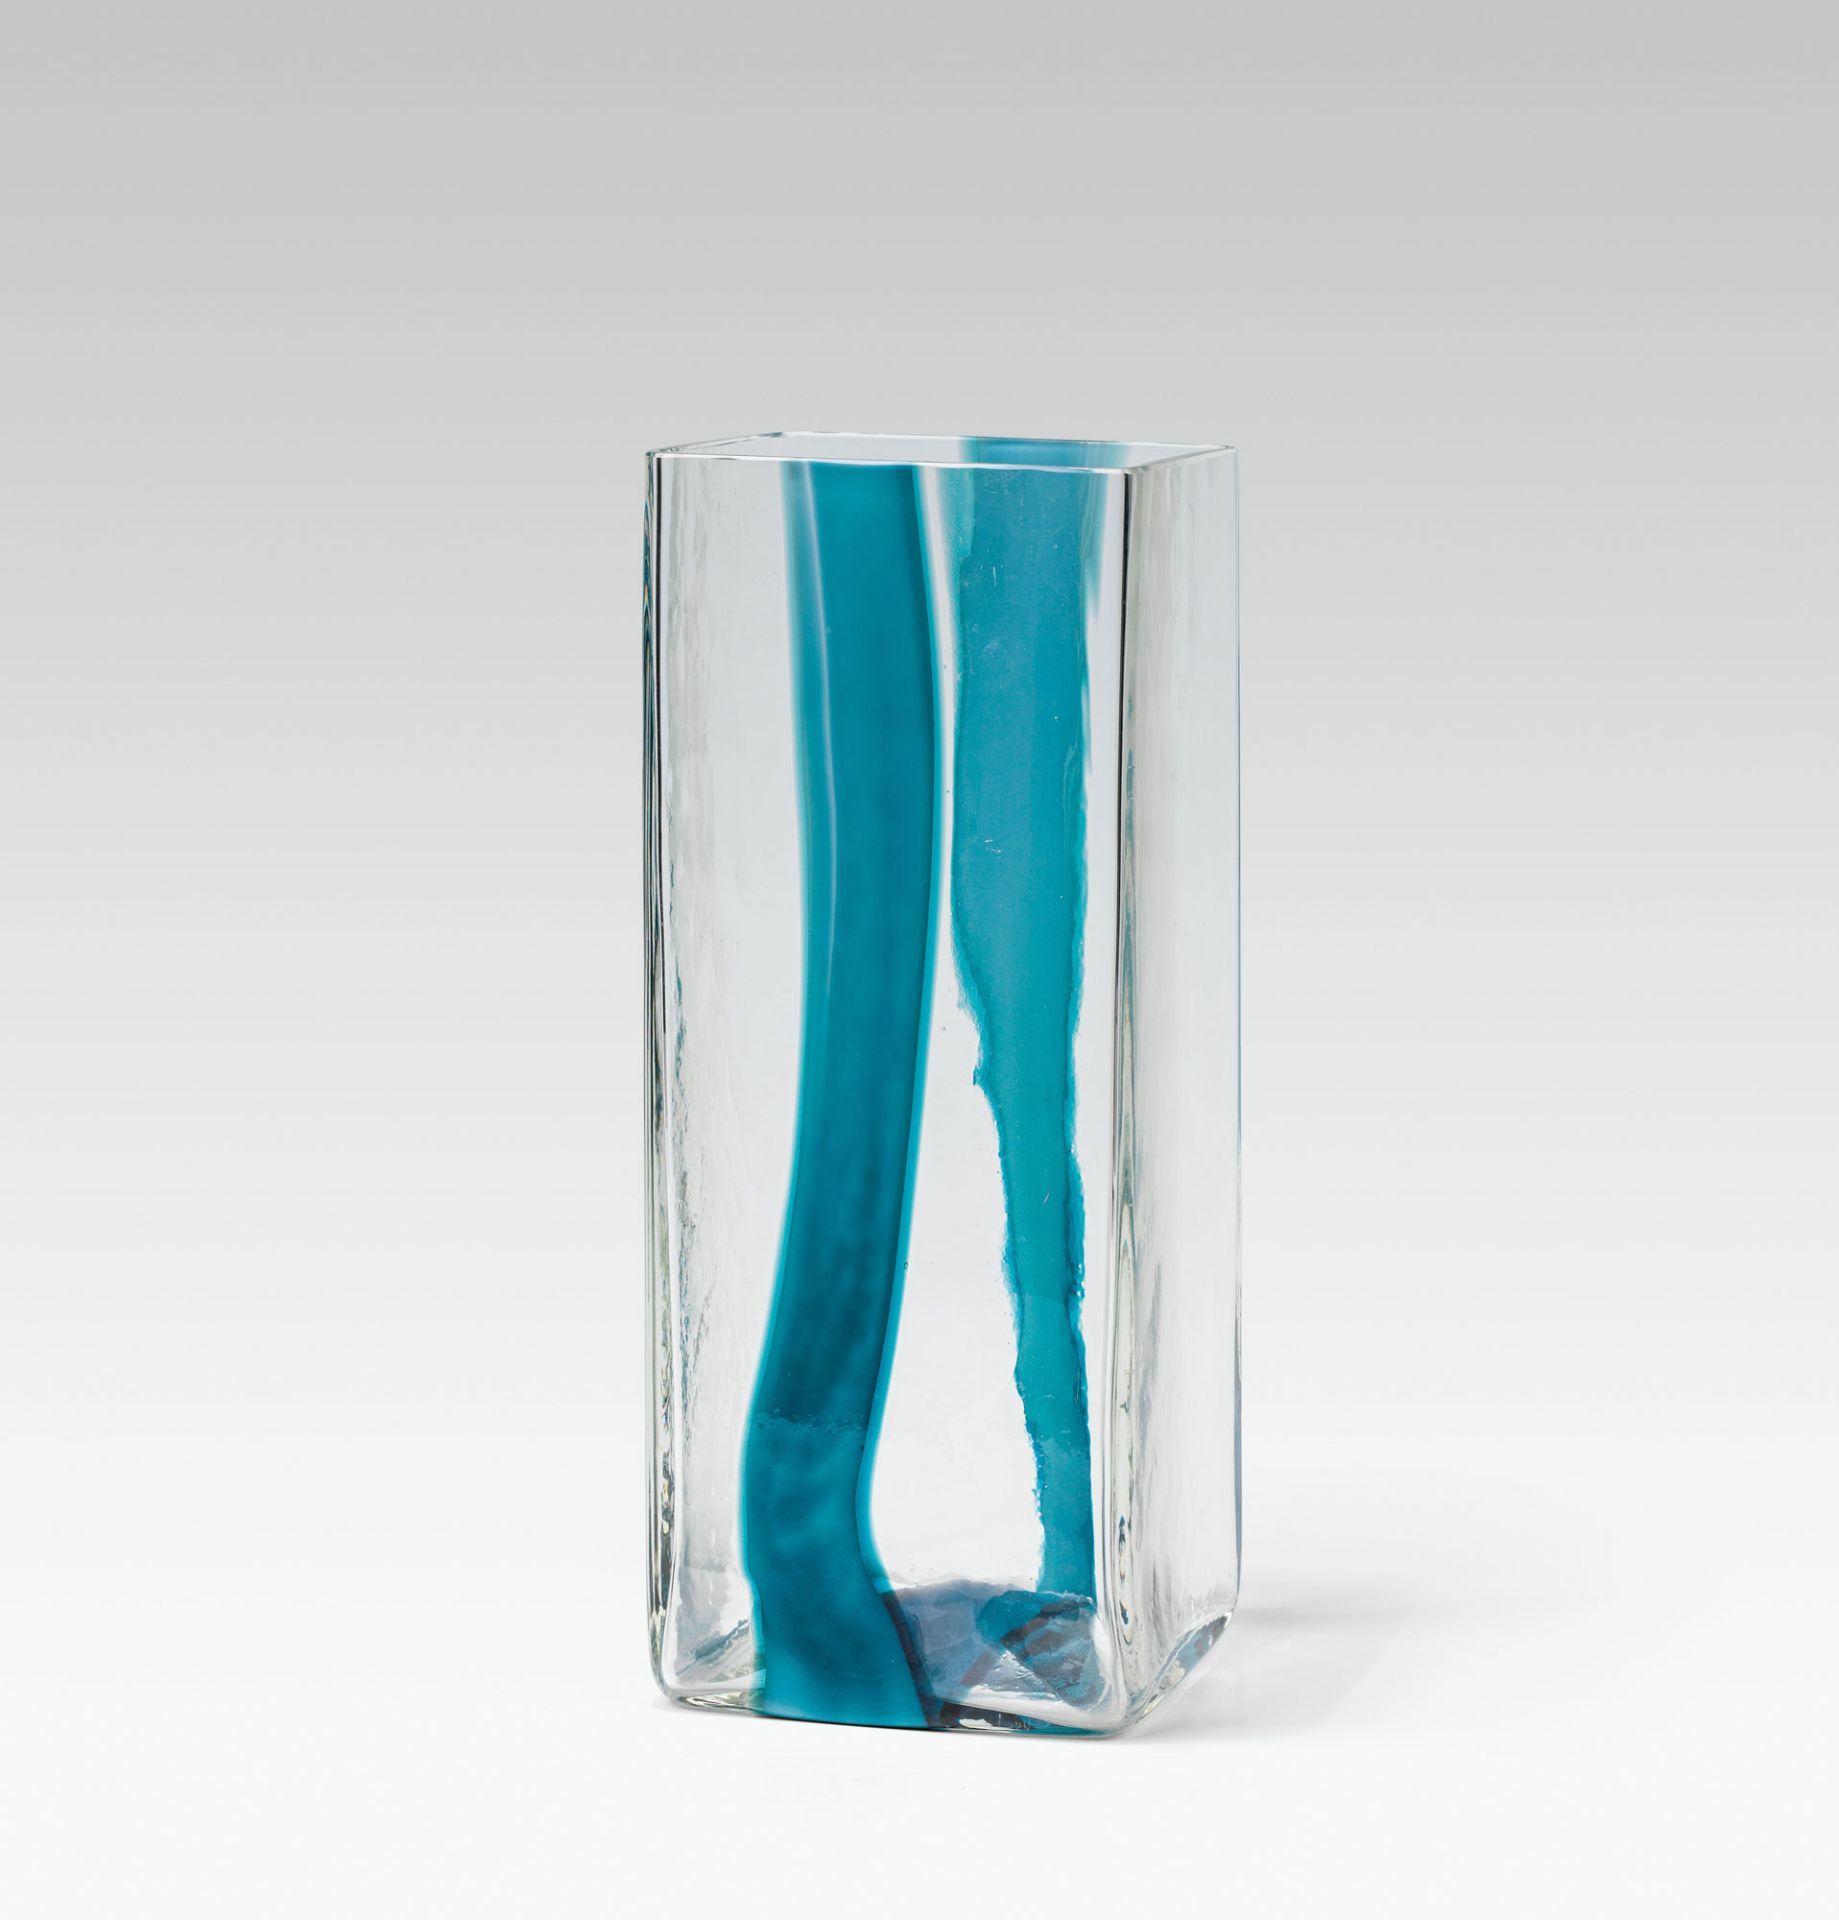 Ludovico de SantillanaVase for Pierre Cardincolourless glass, melted blue glass strips; signed on